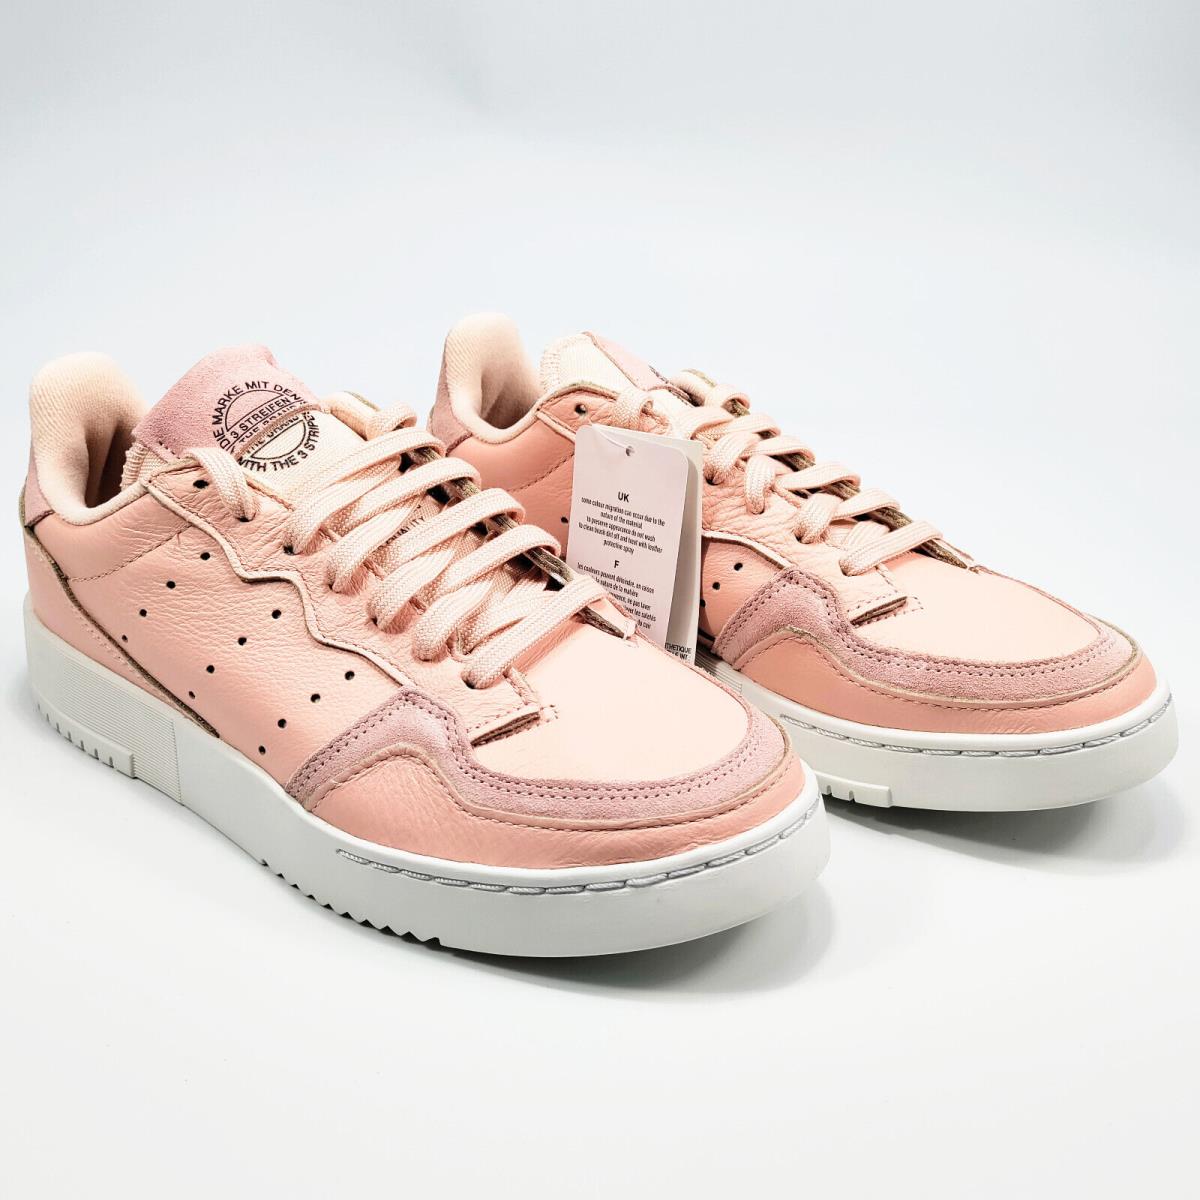 Adidas shoes Revolution Racer - Pink 3